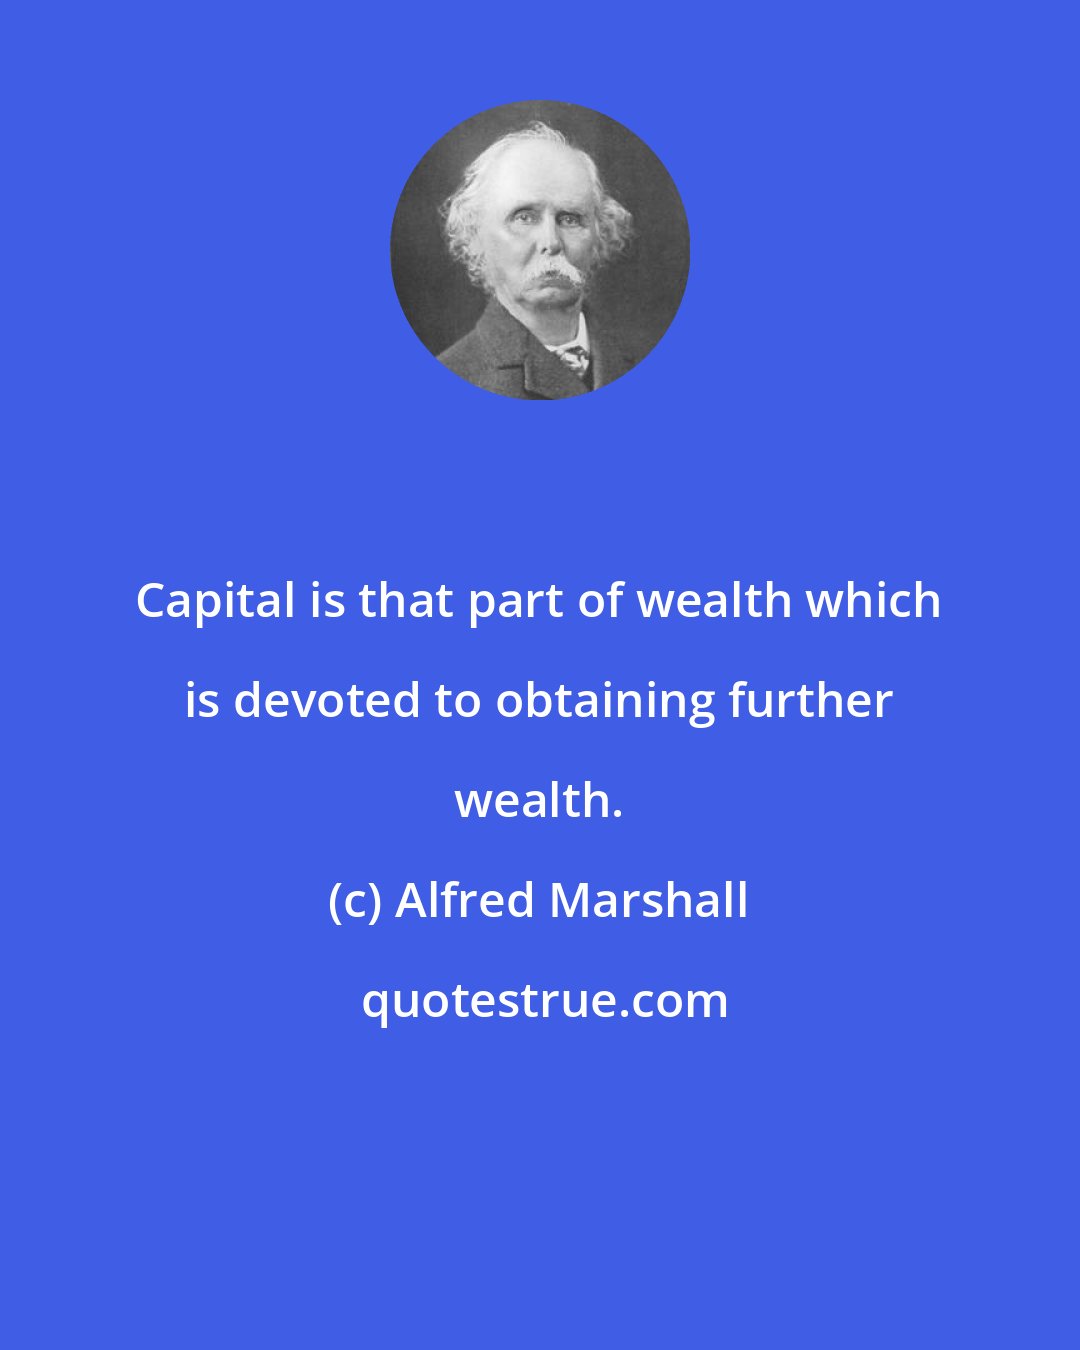 Alfred Marshall: Capital is that part of wealth which is devoted to obtaining further wealth.